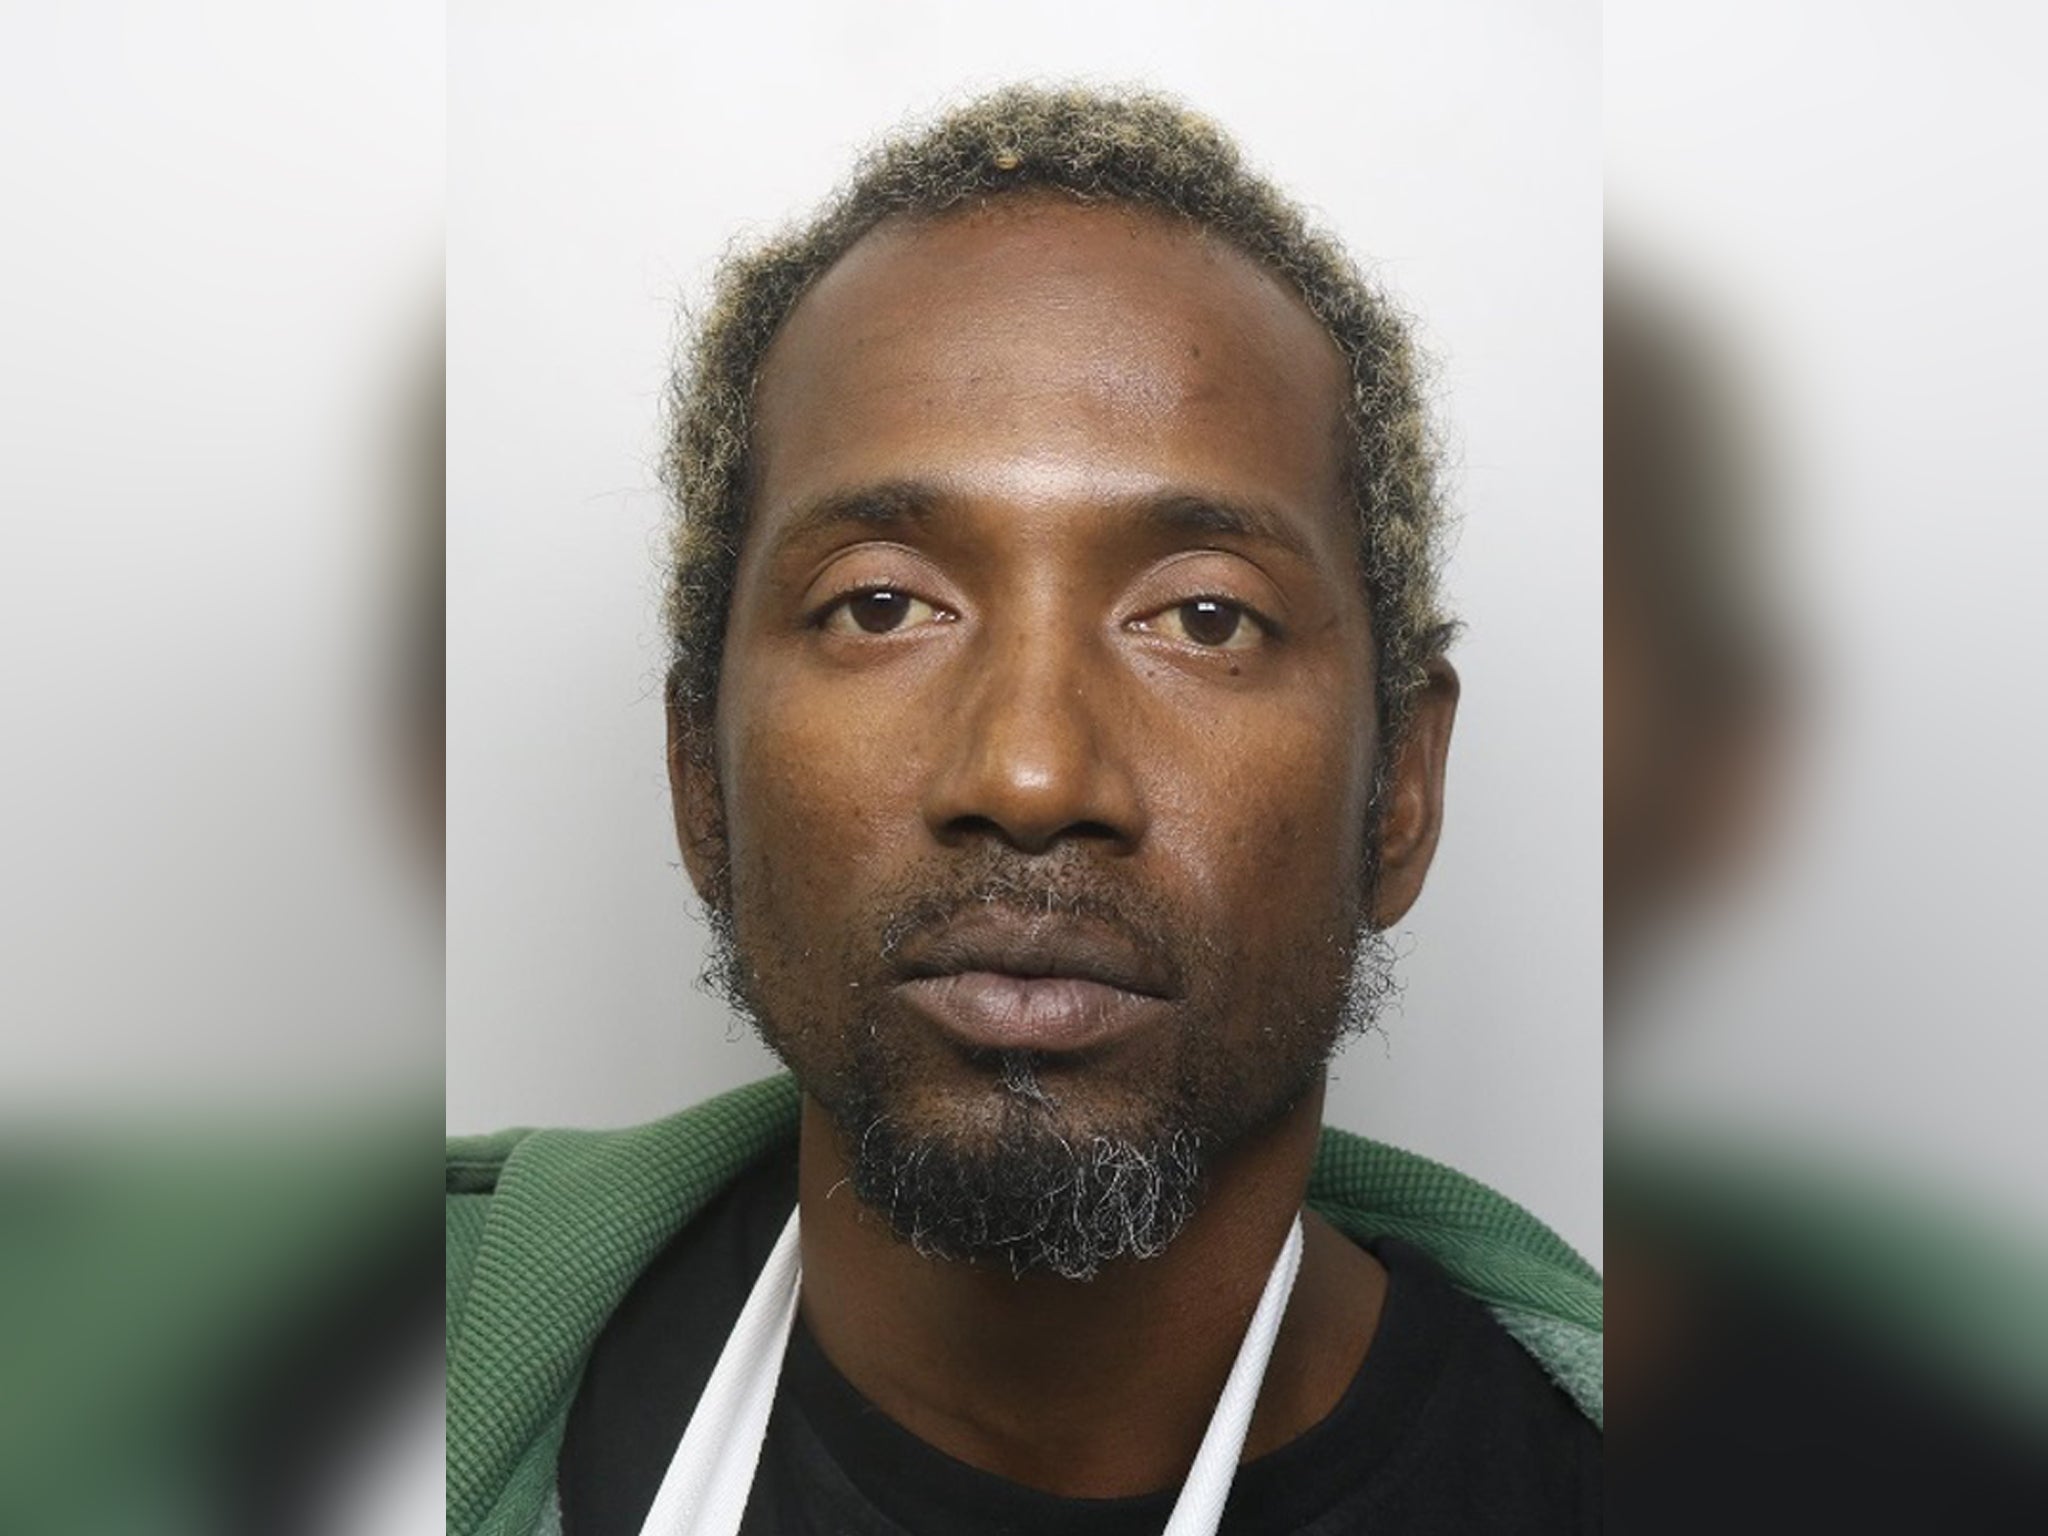 Joseph Dunkley, 46, of Plaistow, was jailed for eight years